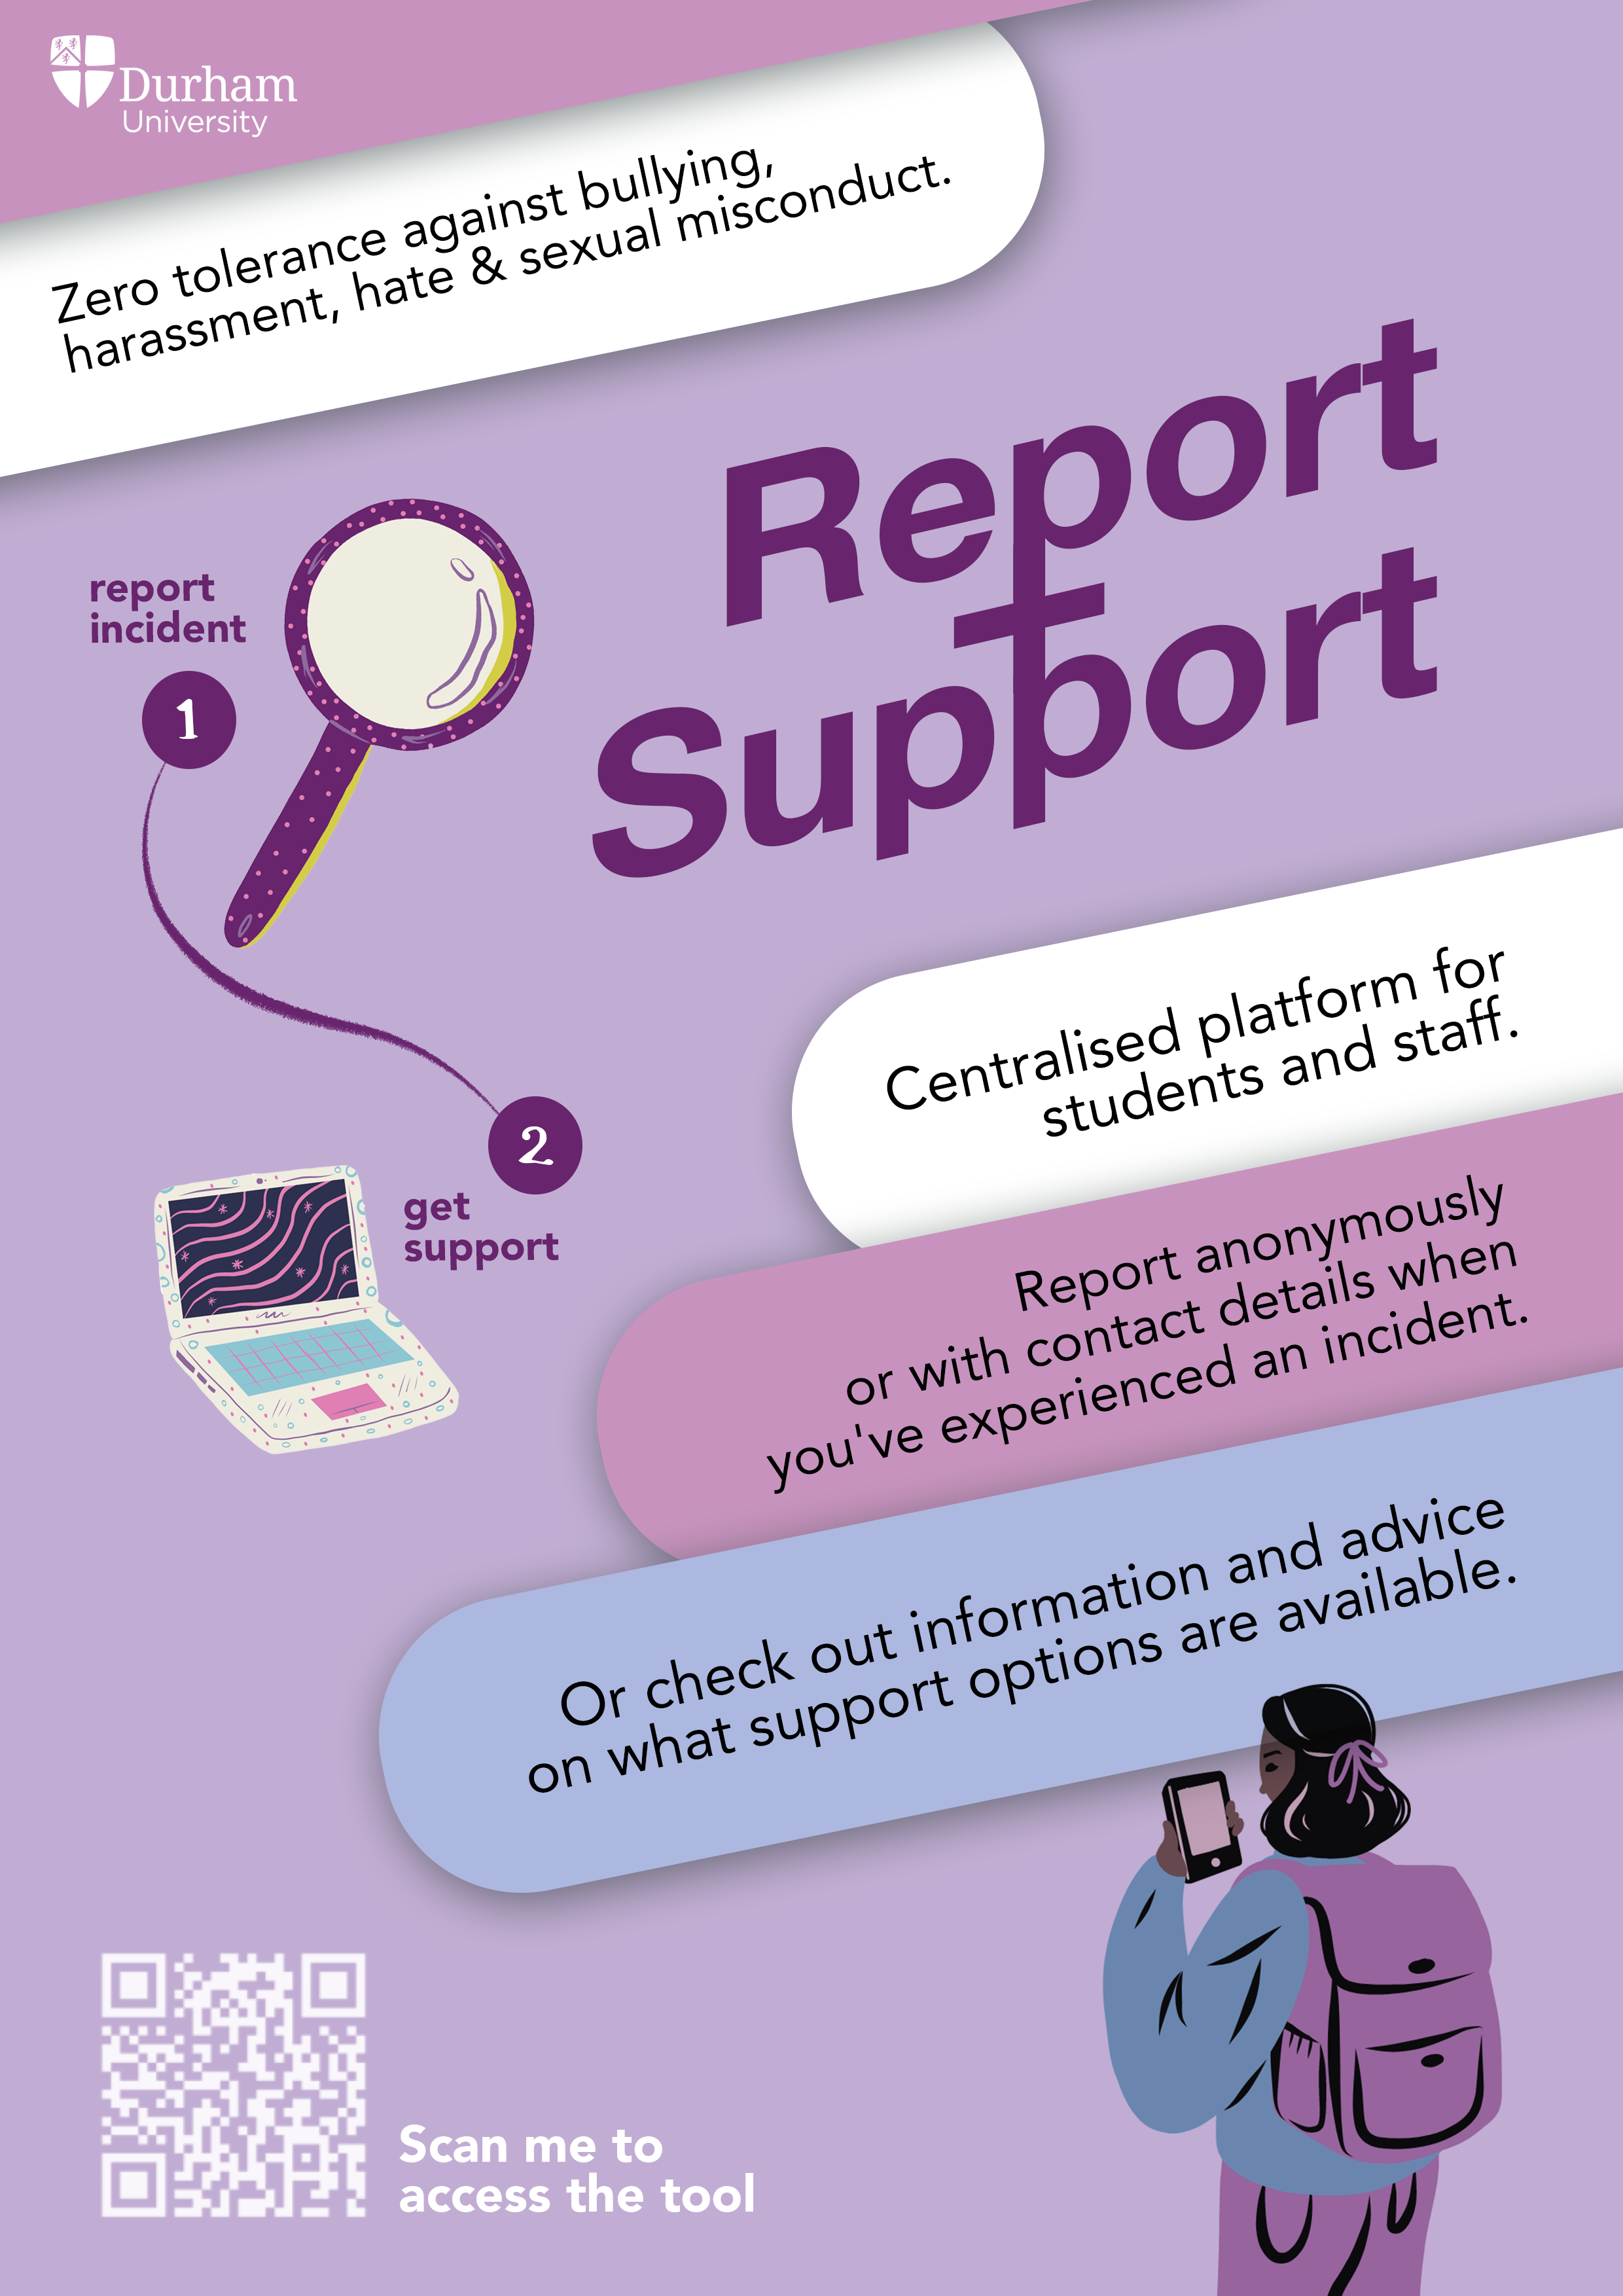 Poster about the Report and Support tool